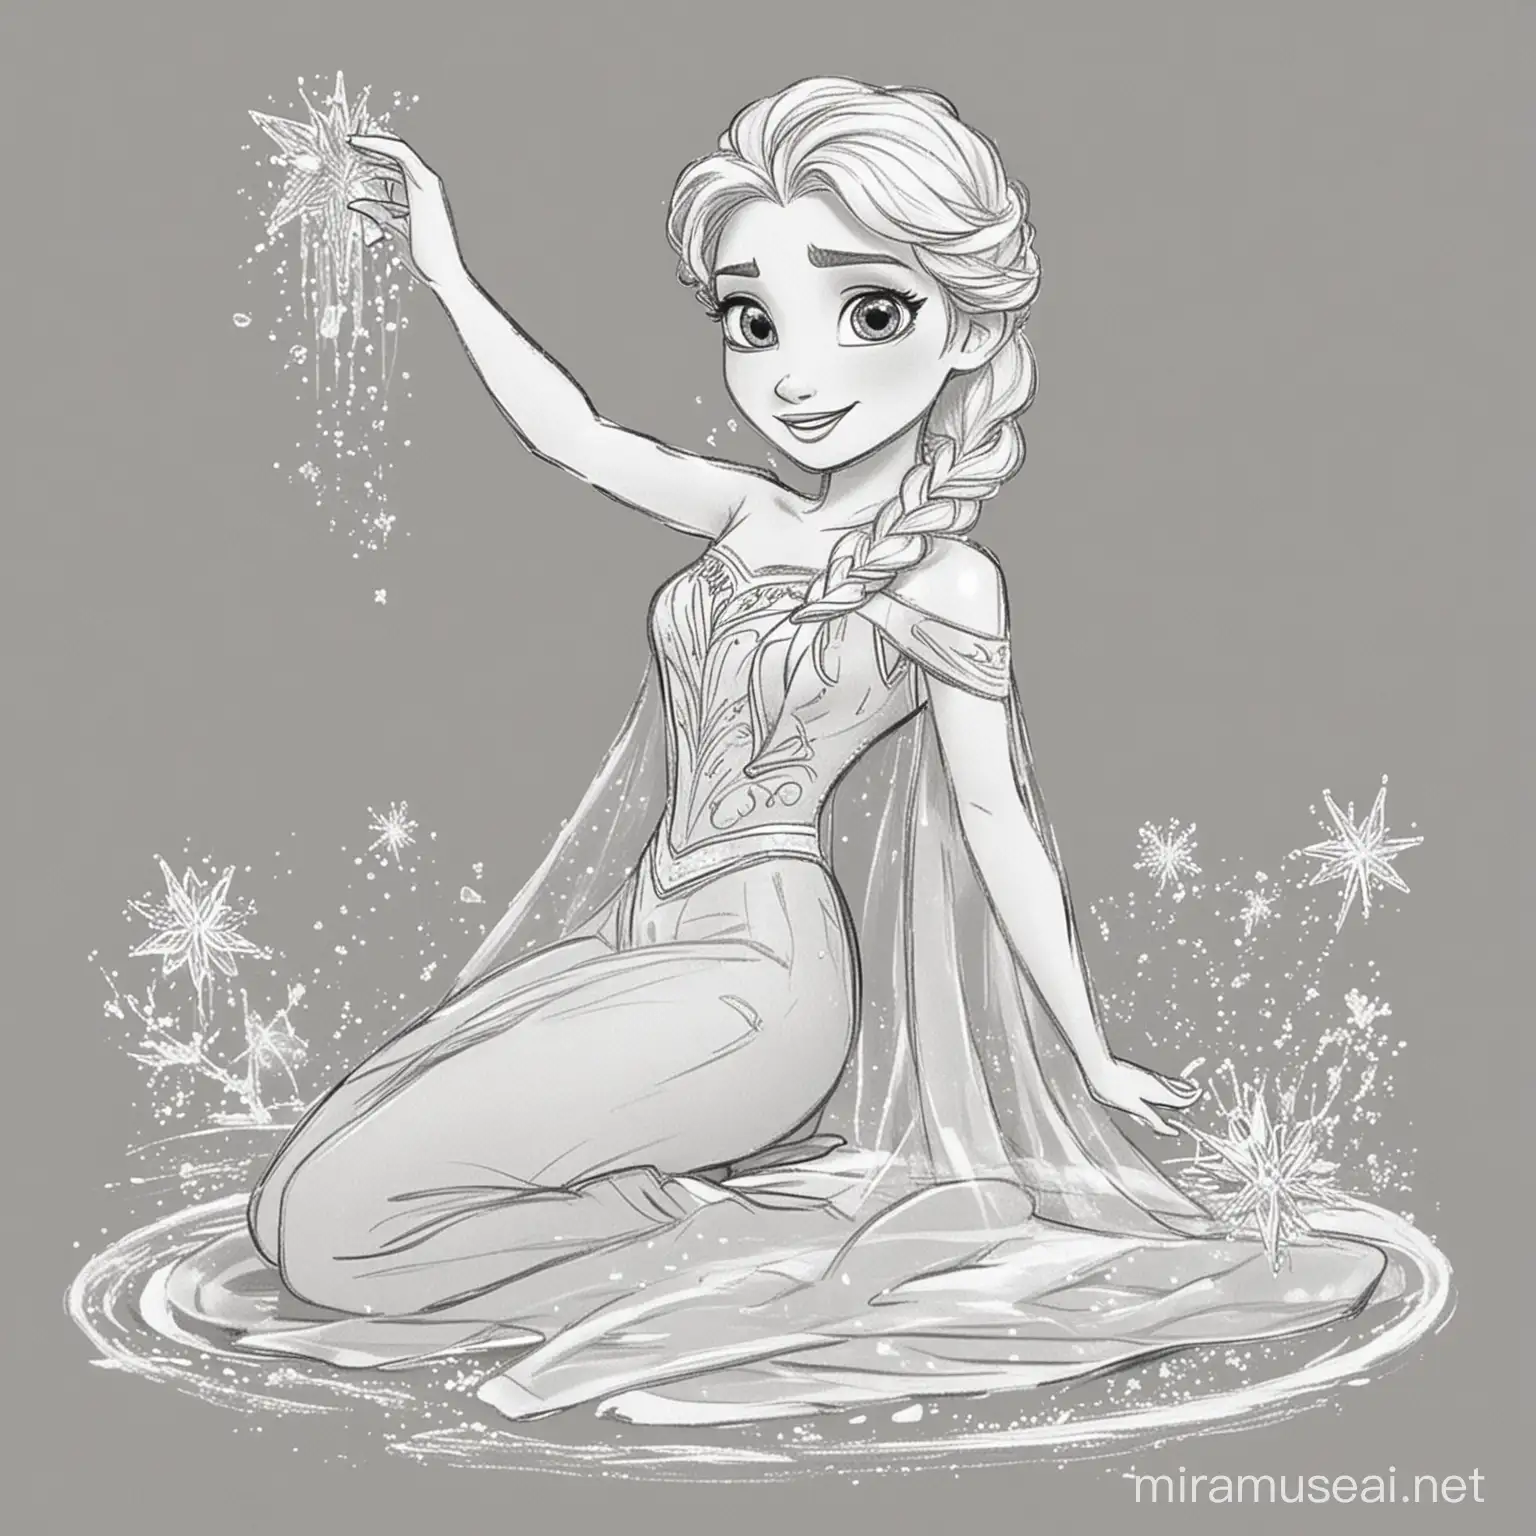 elsa playing with ice black and white colouring in picture
